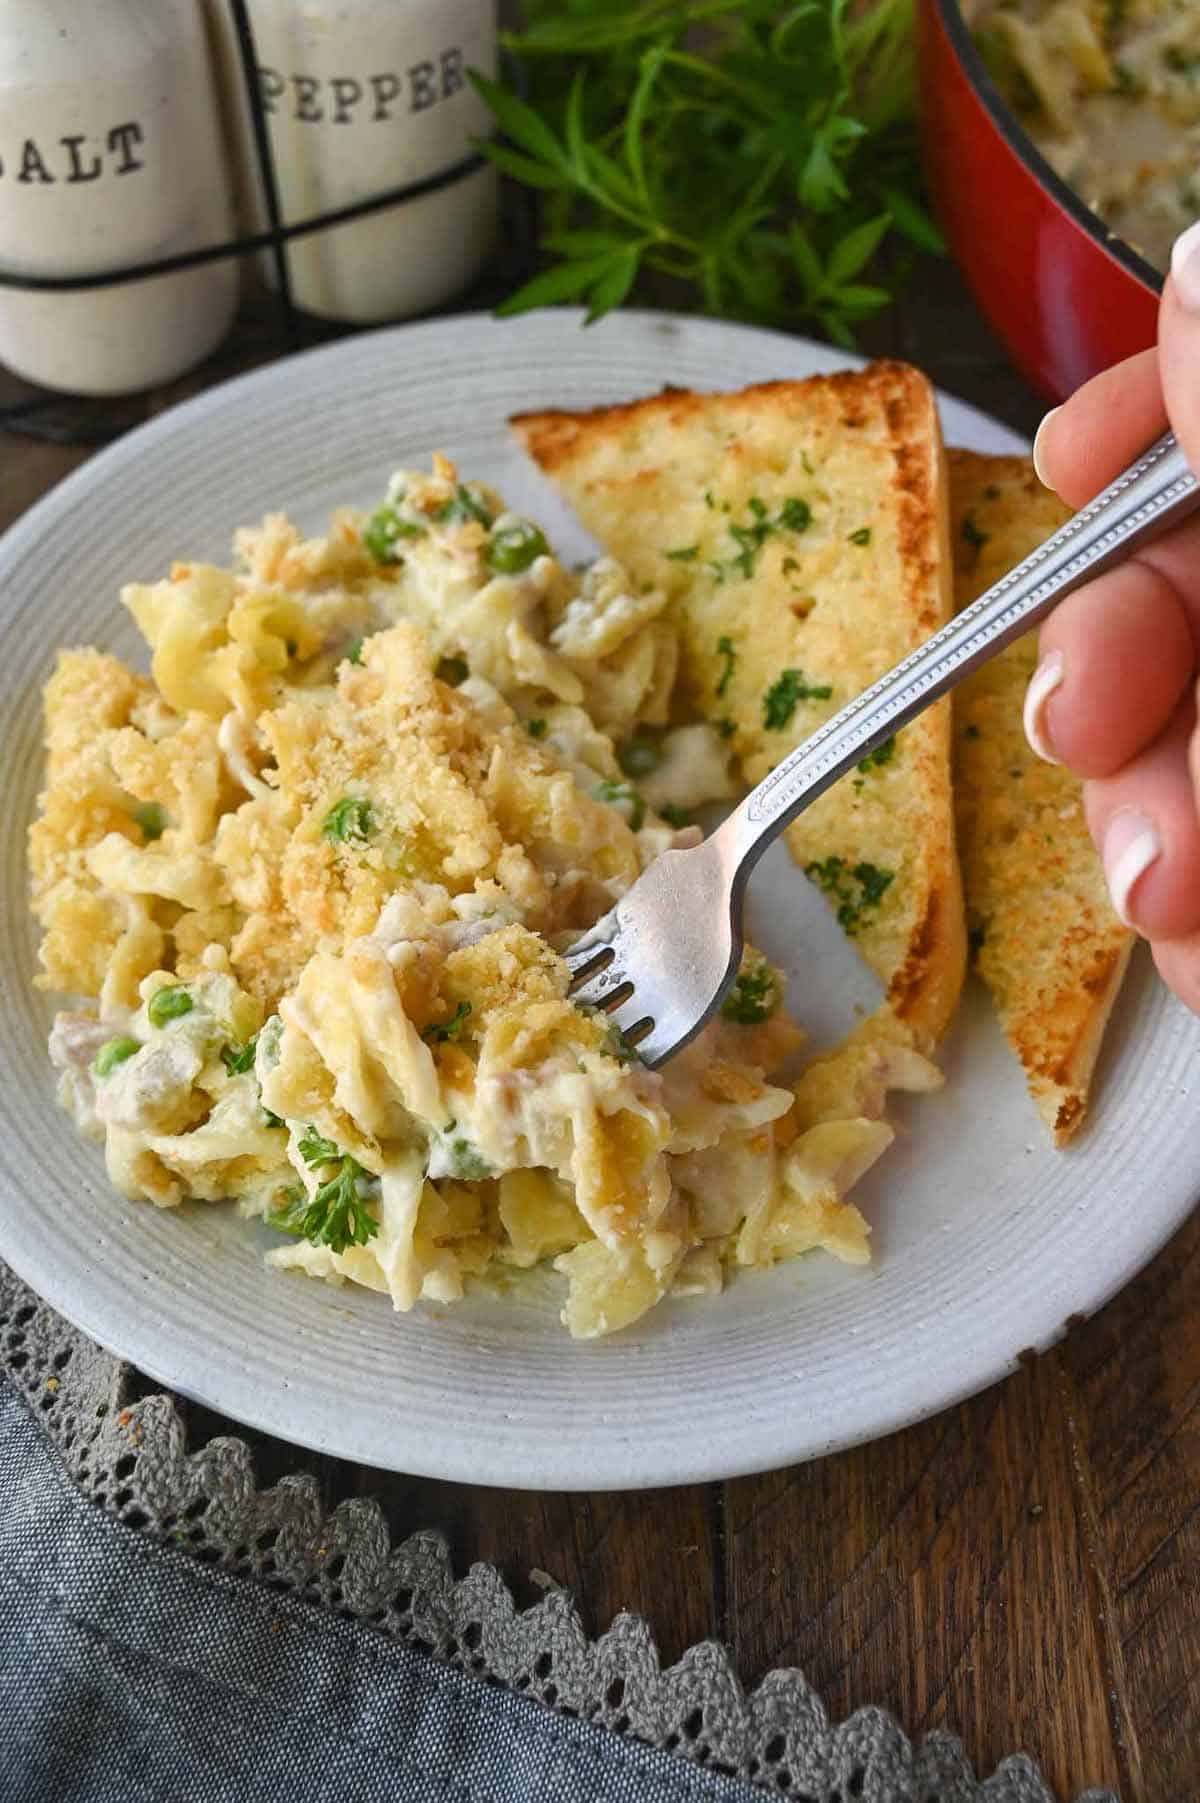 Tuna casserole on a plate with a fork taking a bite.